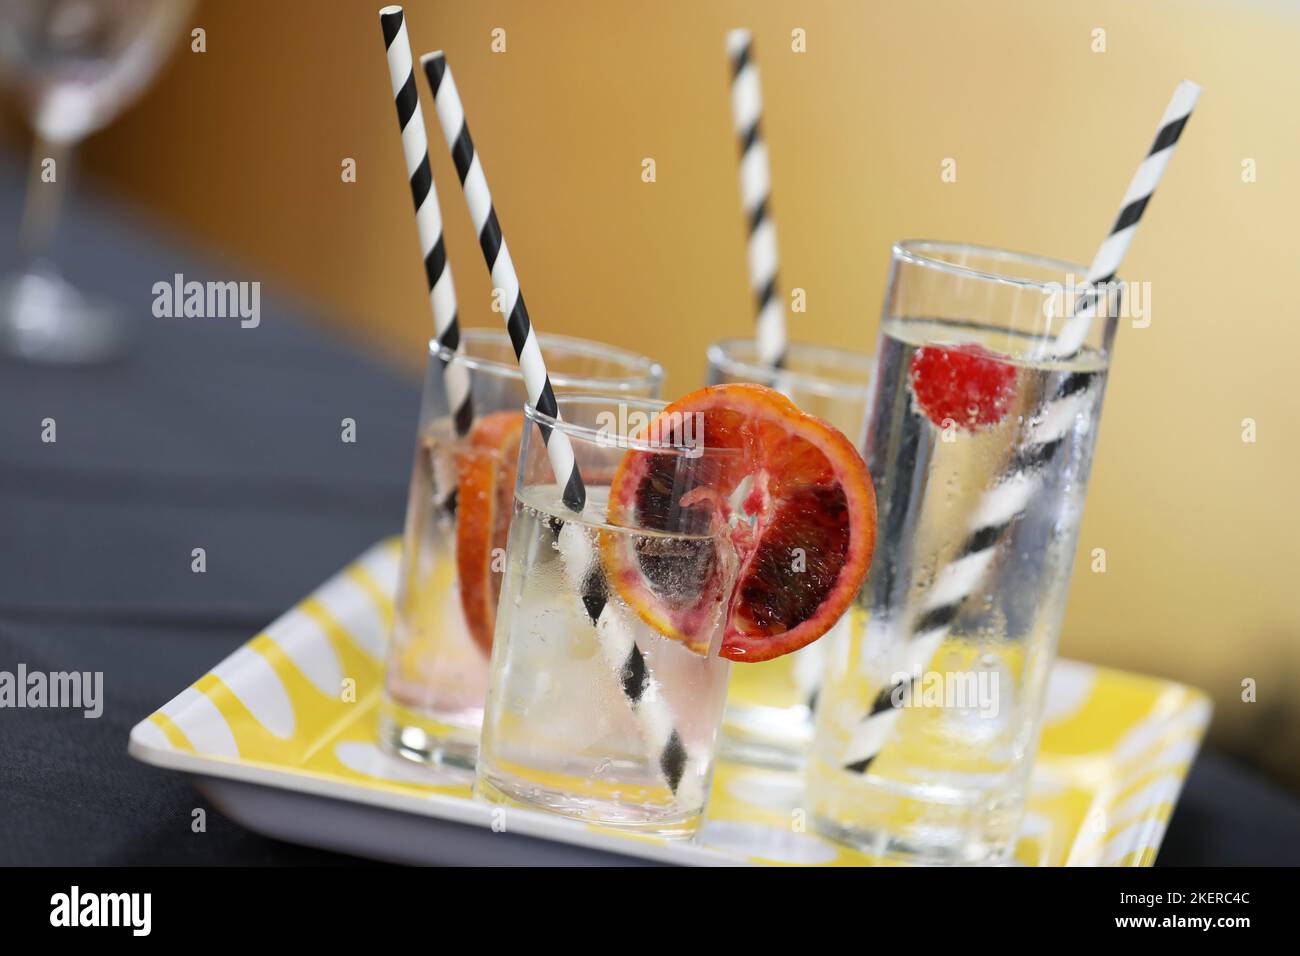 A tray of different tumbler glasses filled with icy cold and clear sparkling water or soda garnished with a slice of blood or red orange and cherries. Stock Photo